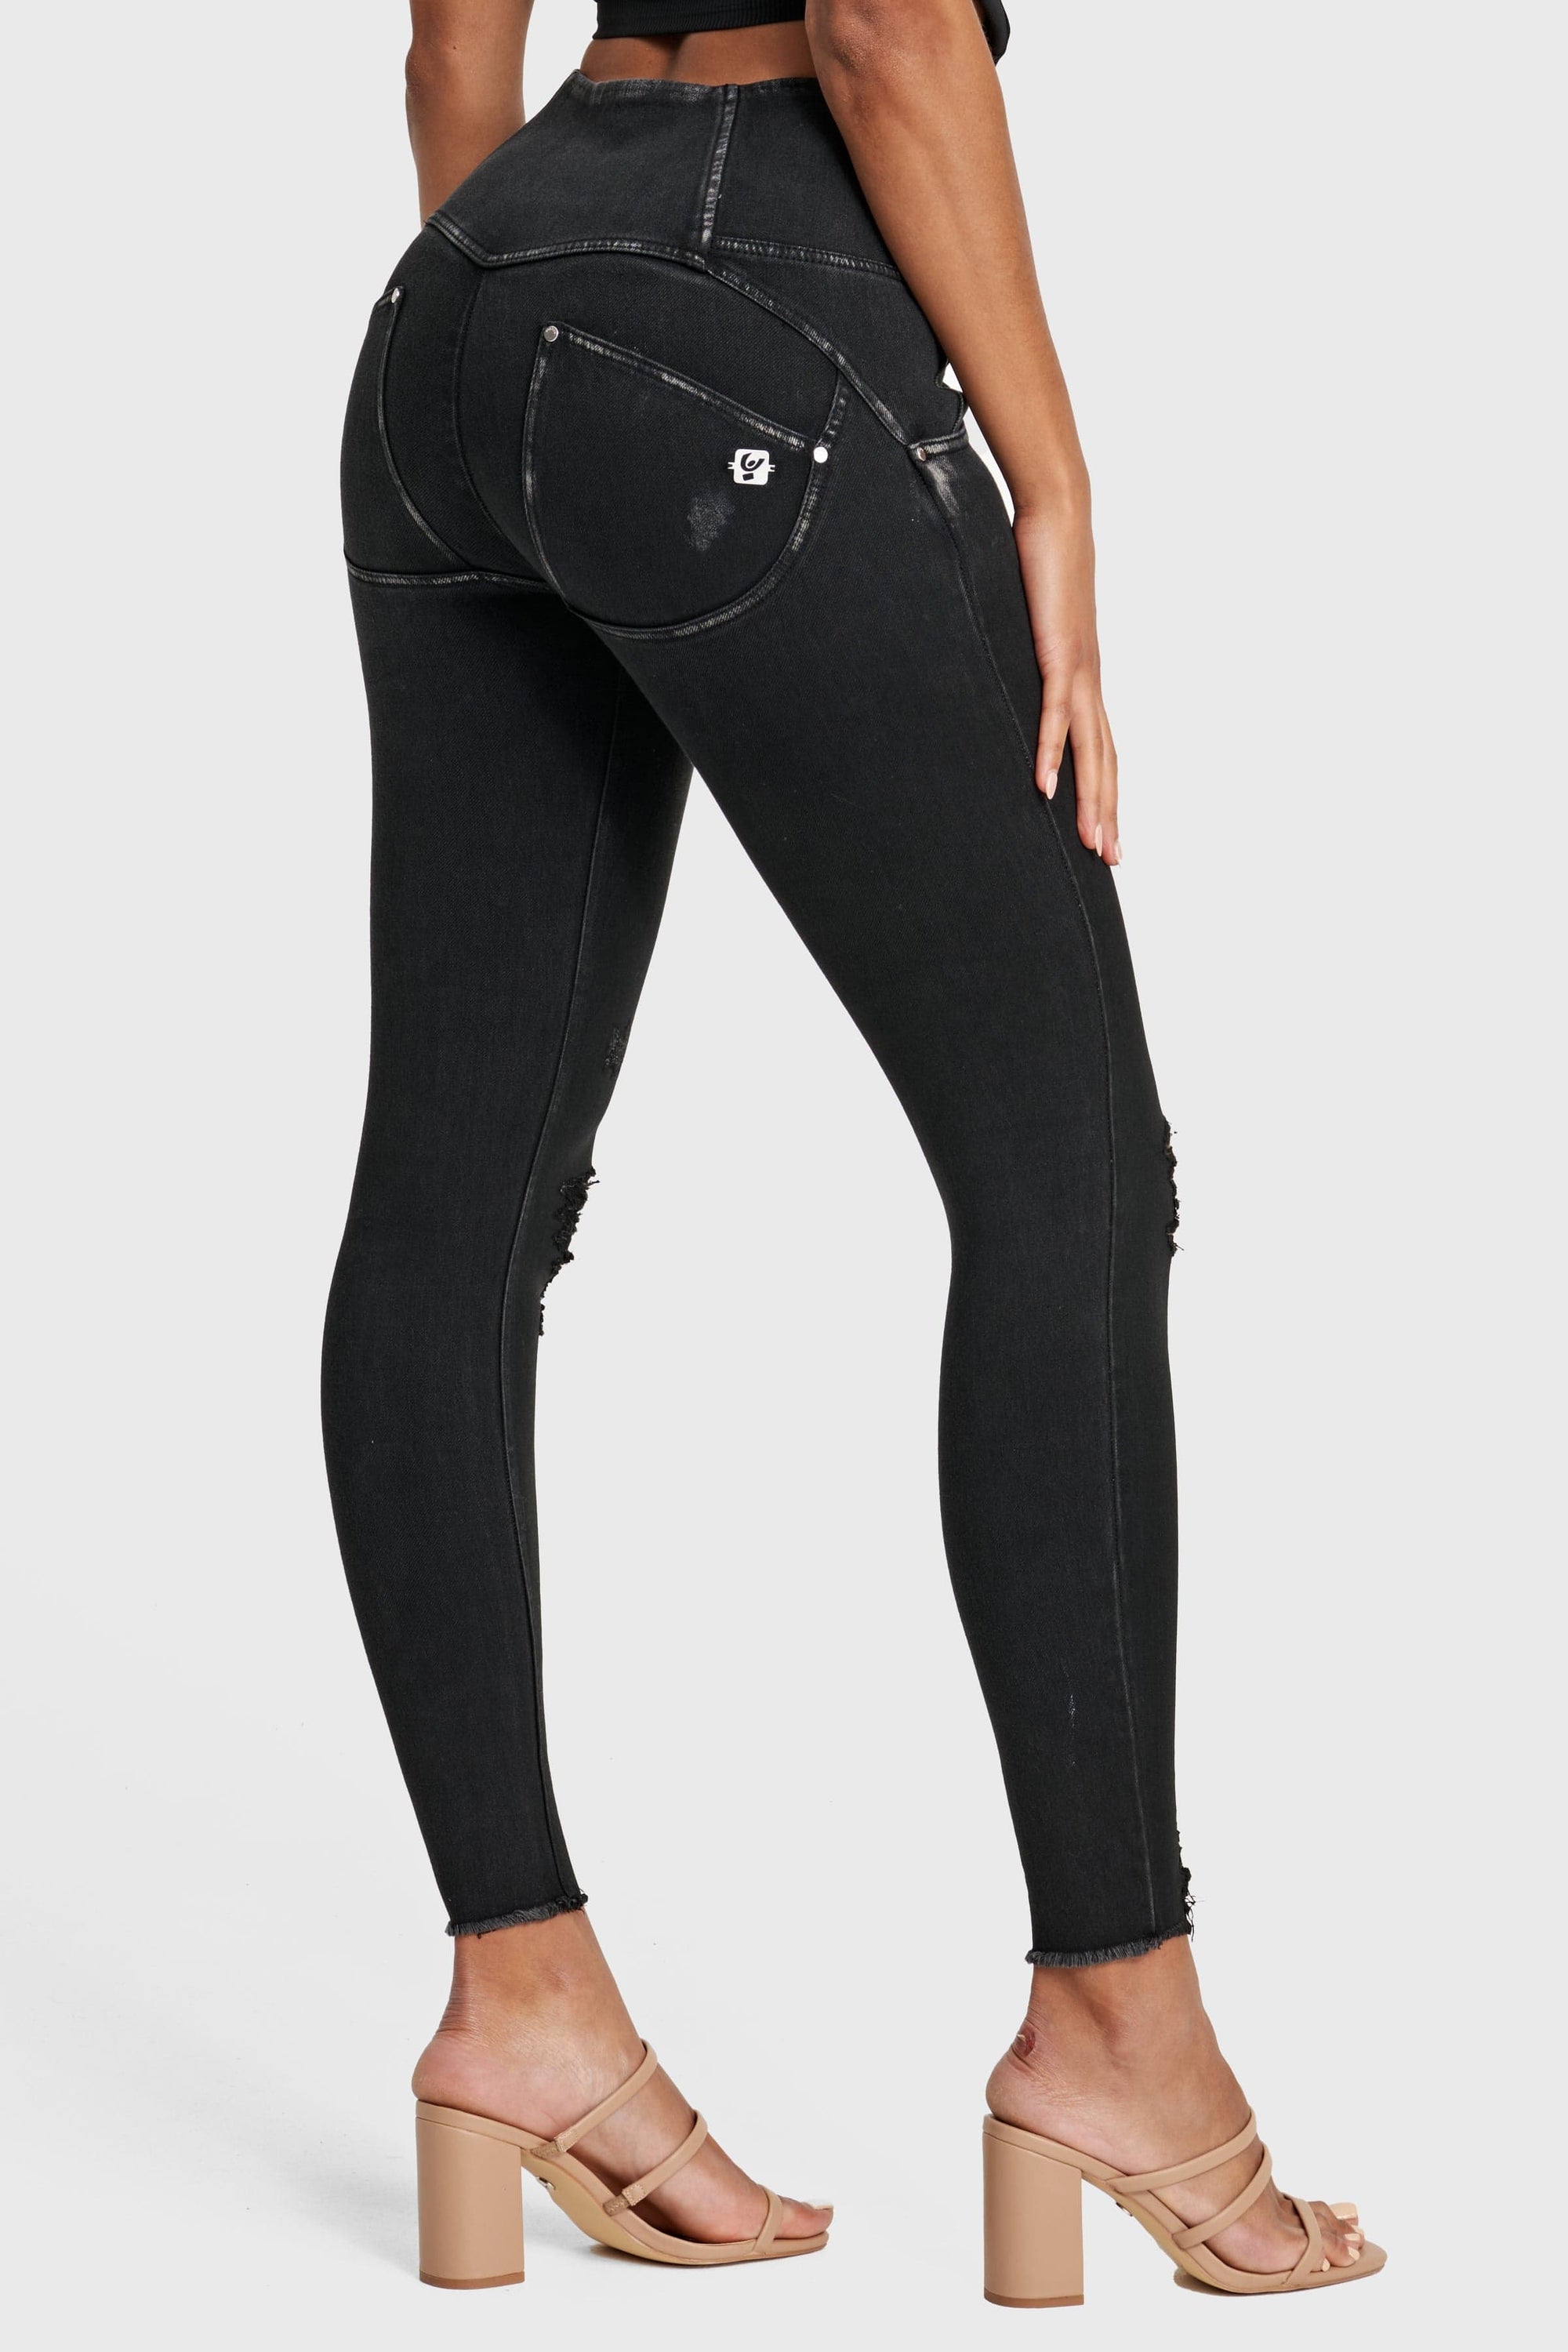 WR.UP® Snug Ripped Jeans - High Waisted - Full Length - Coated Black + Black Stitching 3